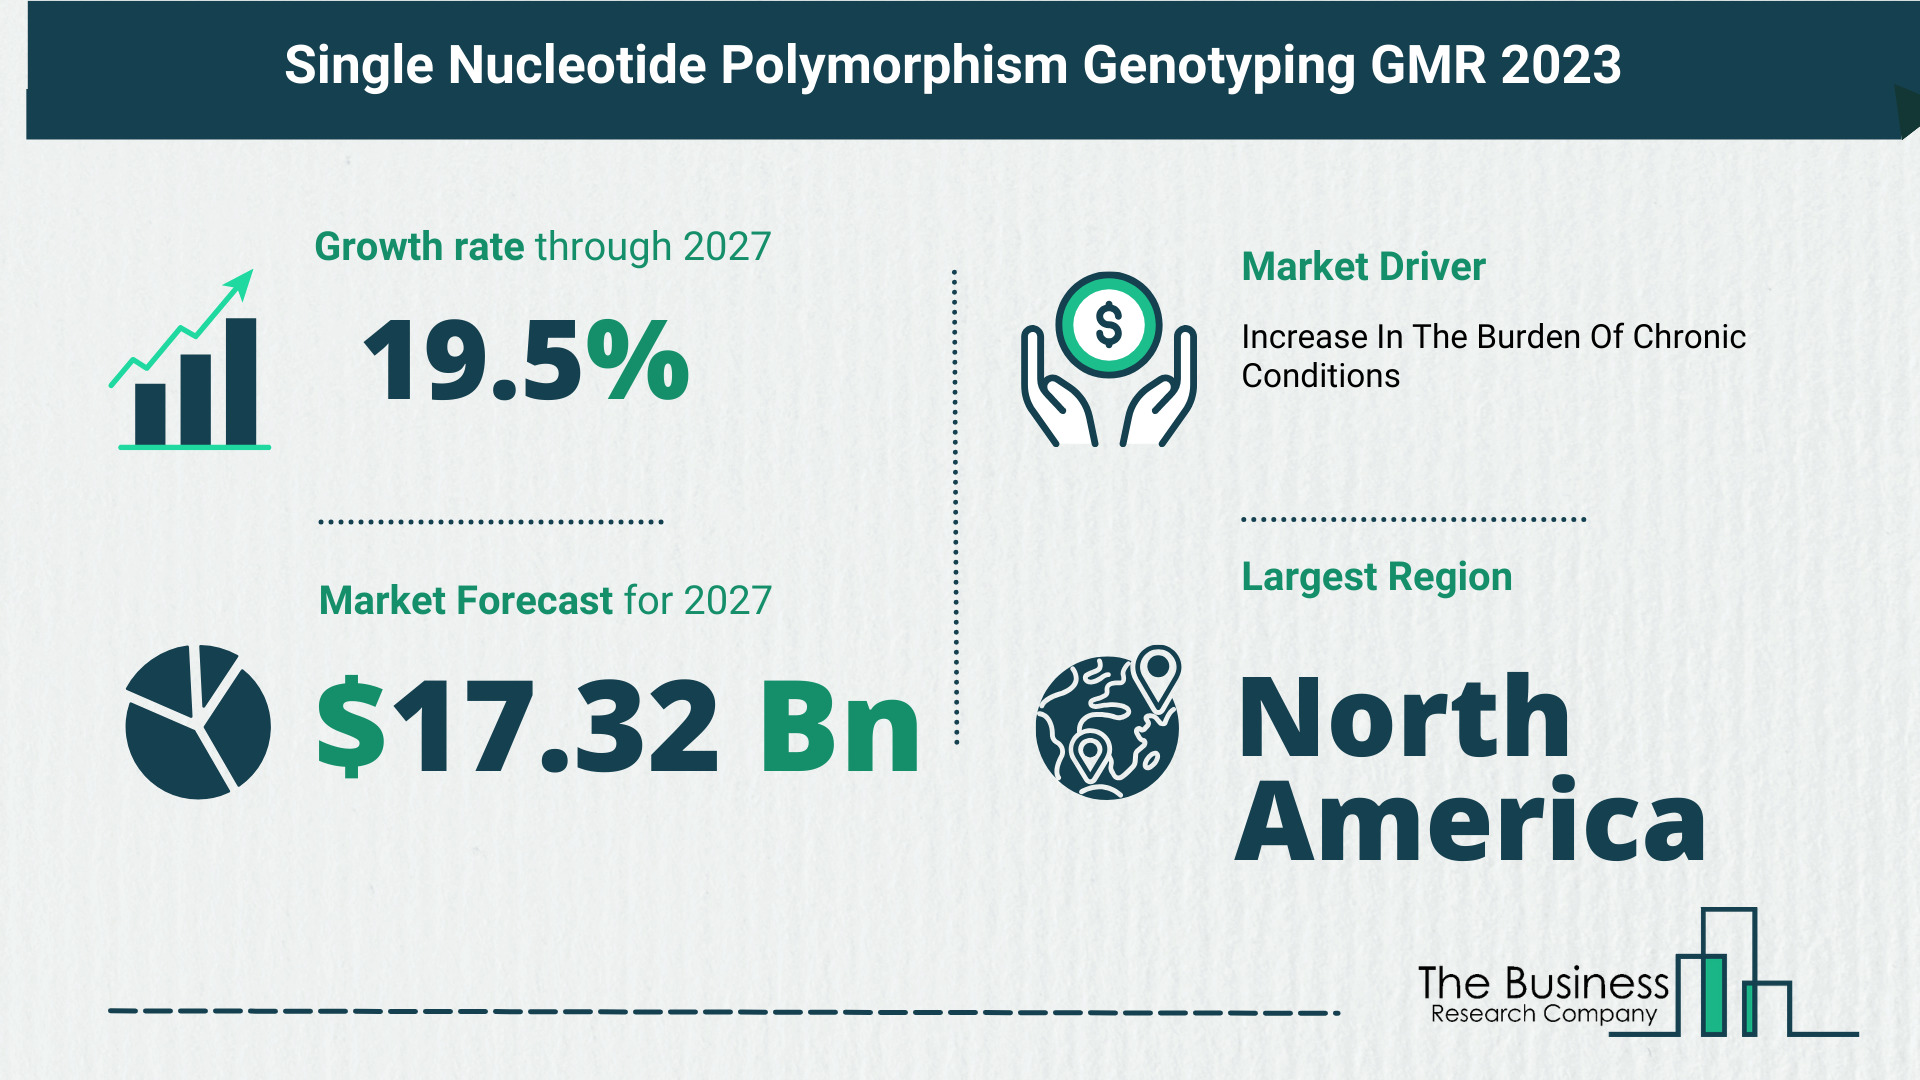 What Is The Forecast Growth Rate For The Single Nucleotide Polymorphism (SNP) Genotyping Market?